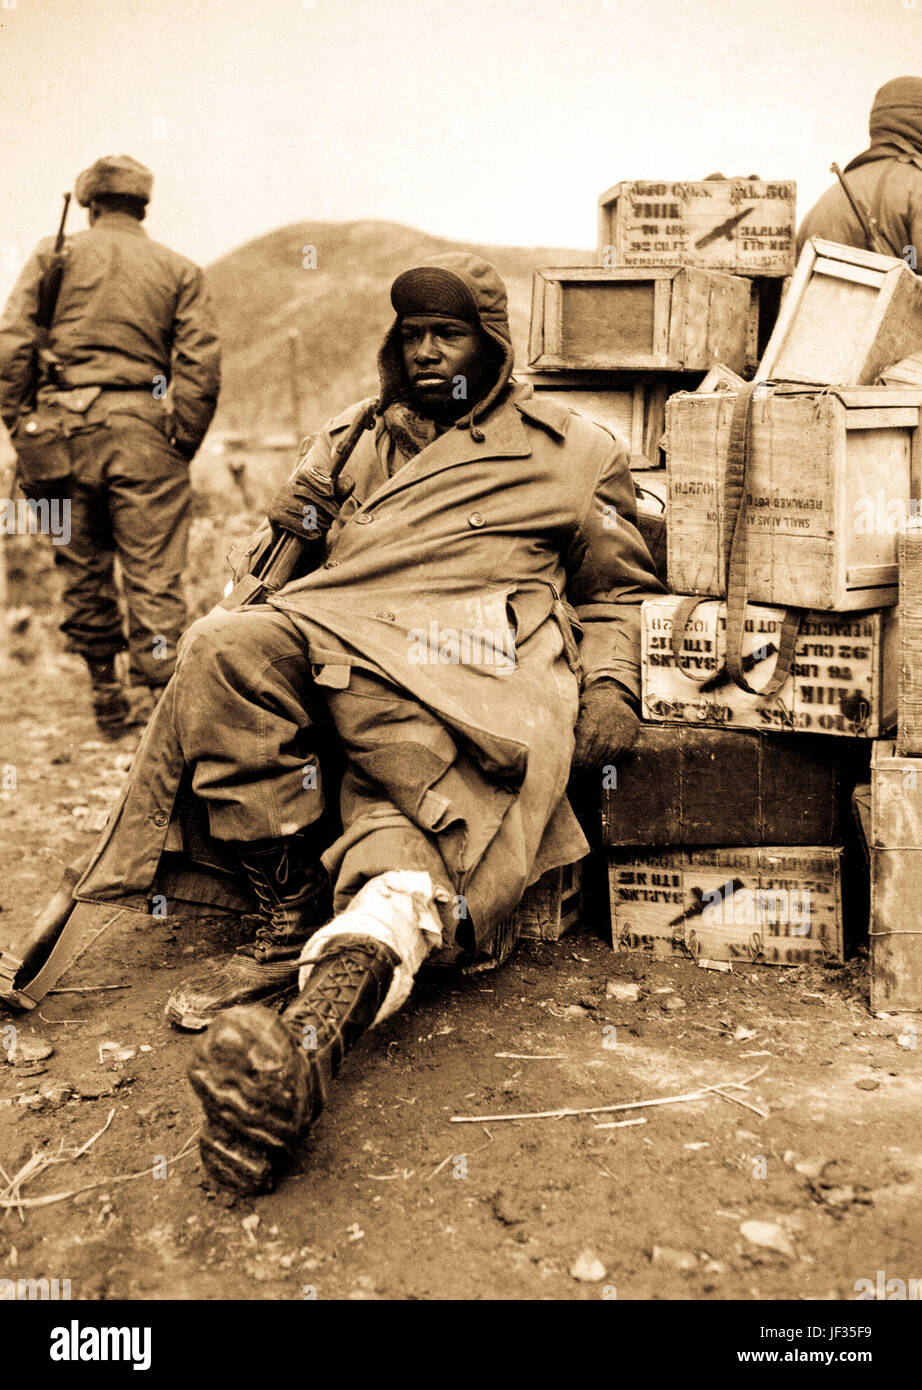 Pfc. Edward Wilson, 24th Inf. Regt., wounded in leg while engaged in action against the enemy forces near the front lines in Korea, waits to be evacuated to aid station behind the lines.  February 16, 1951. Photo by Pfc. Charles Fabiszak. (Army) Stock Photo